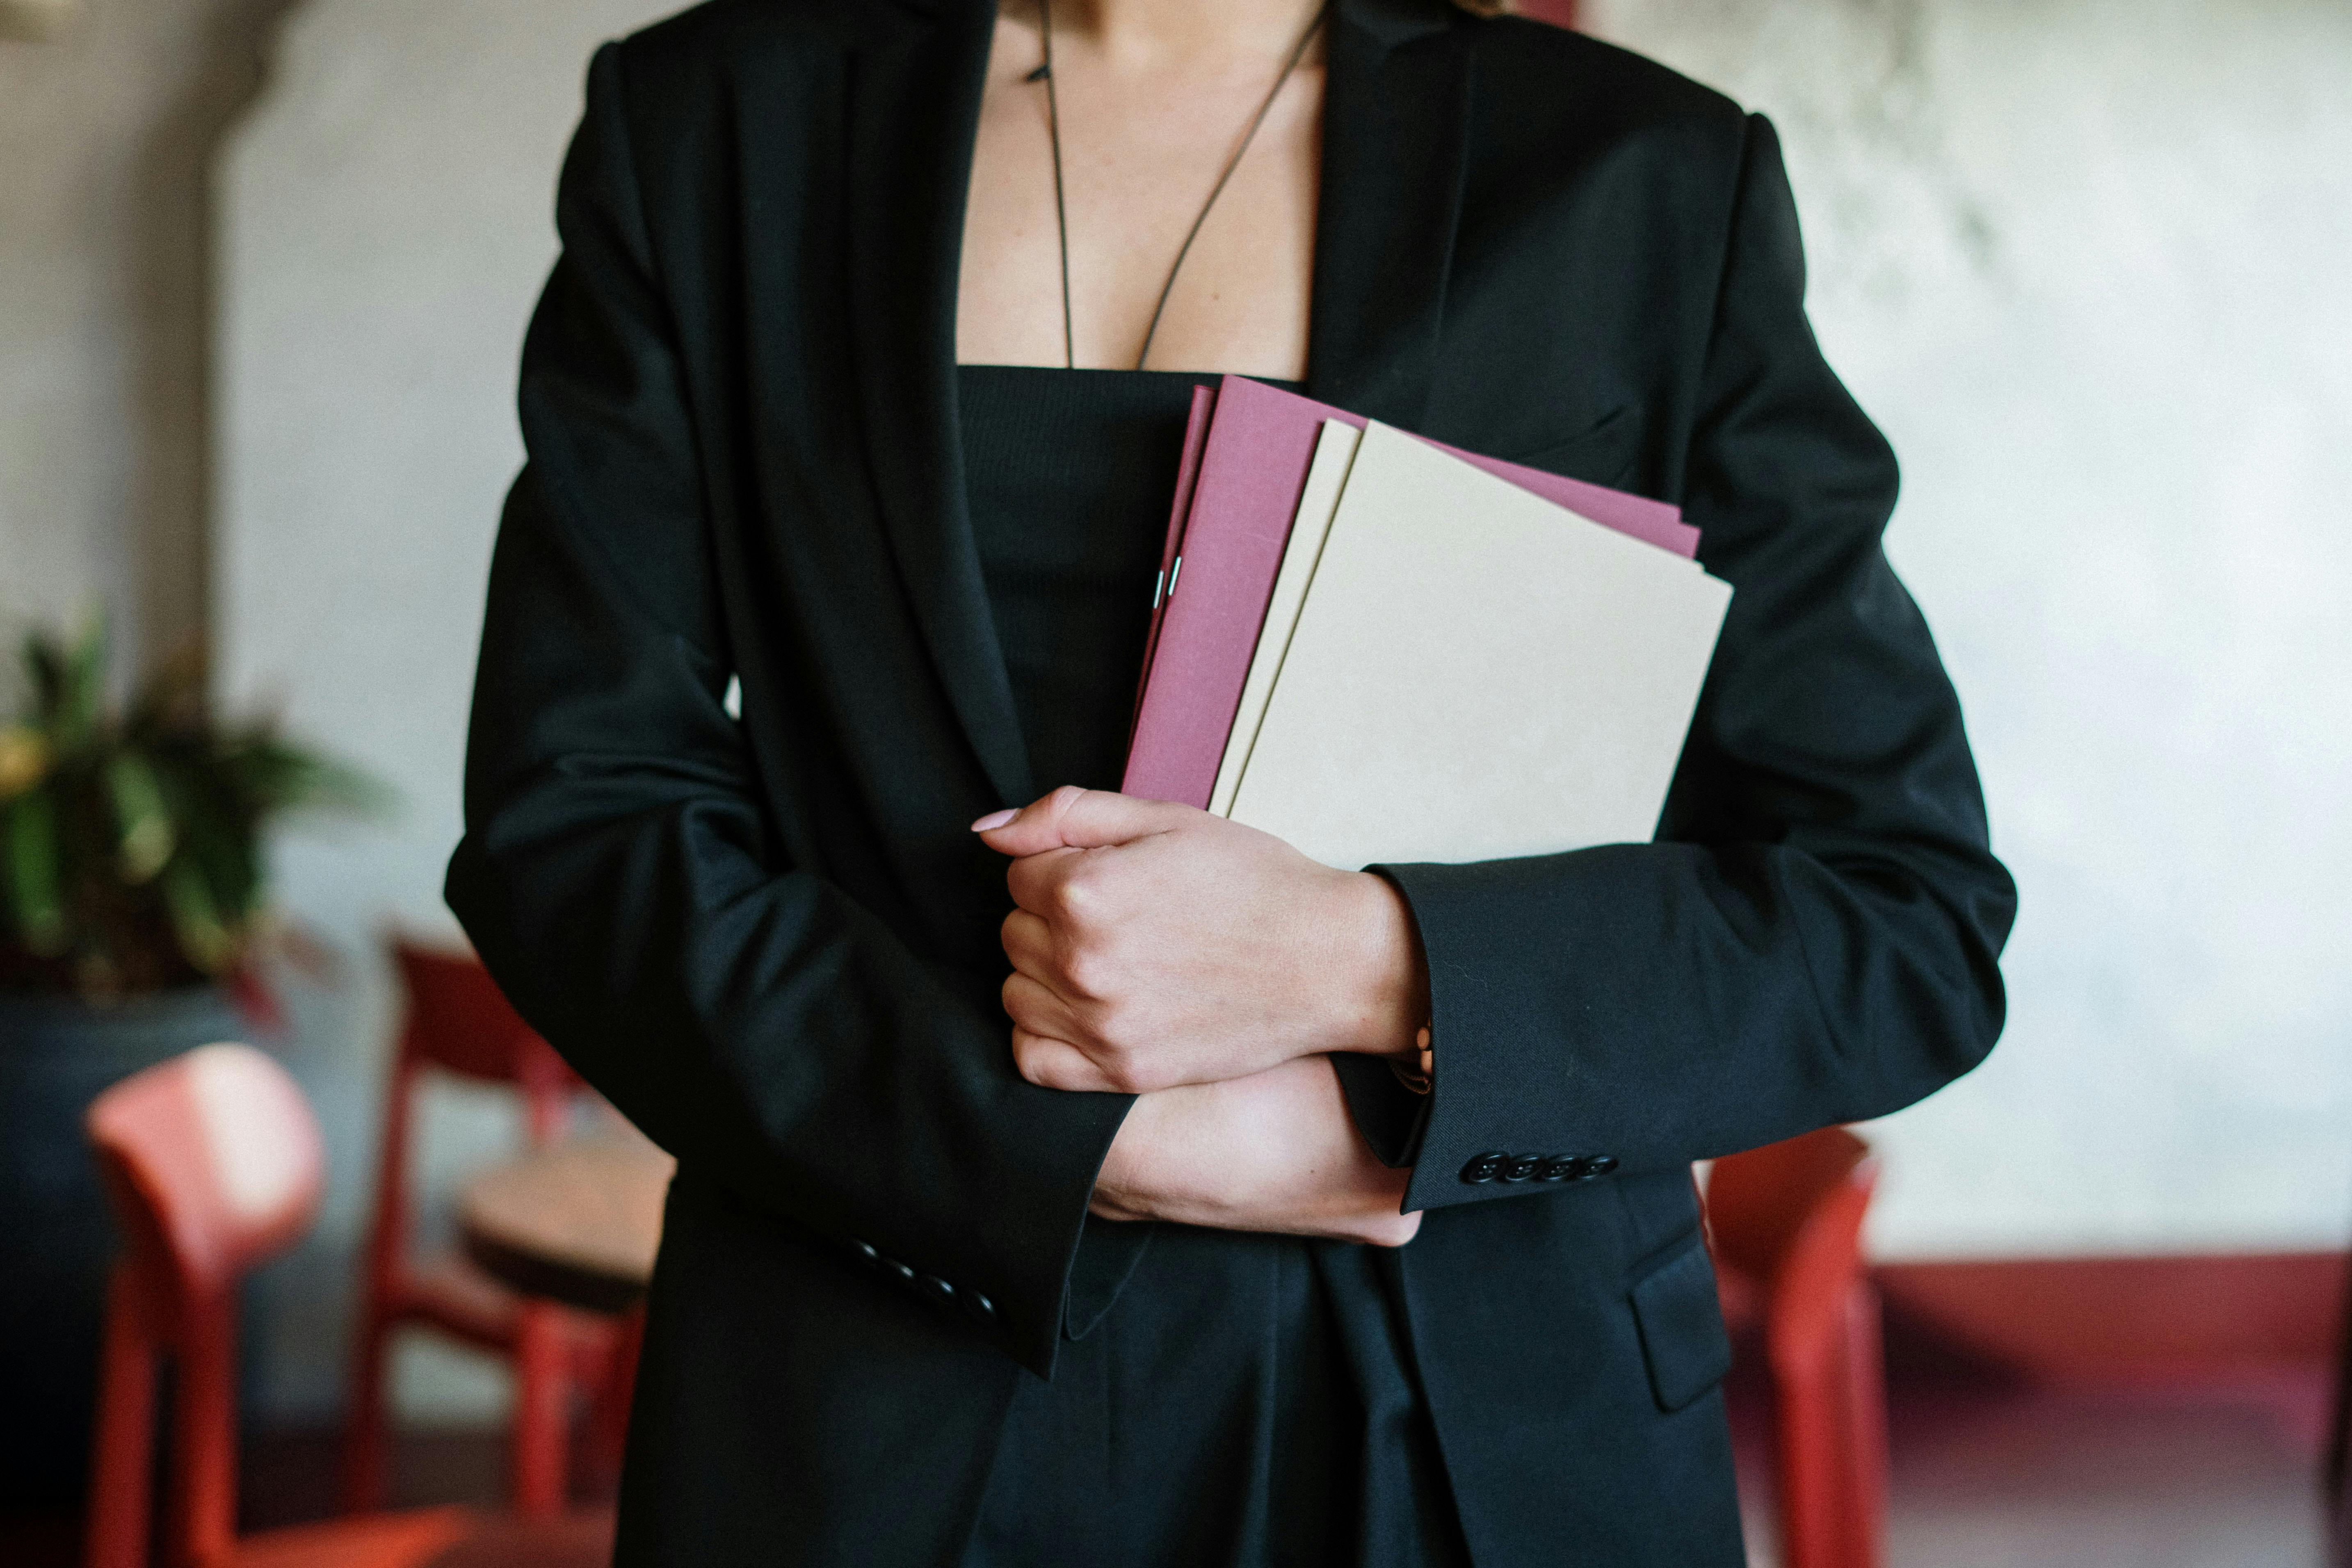 A restaurant hostess holding the restaurant booking sheets | Source: Pexels